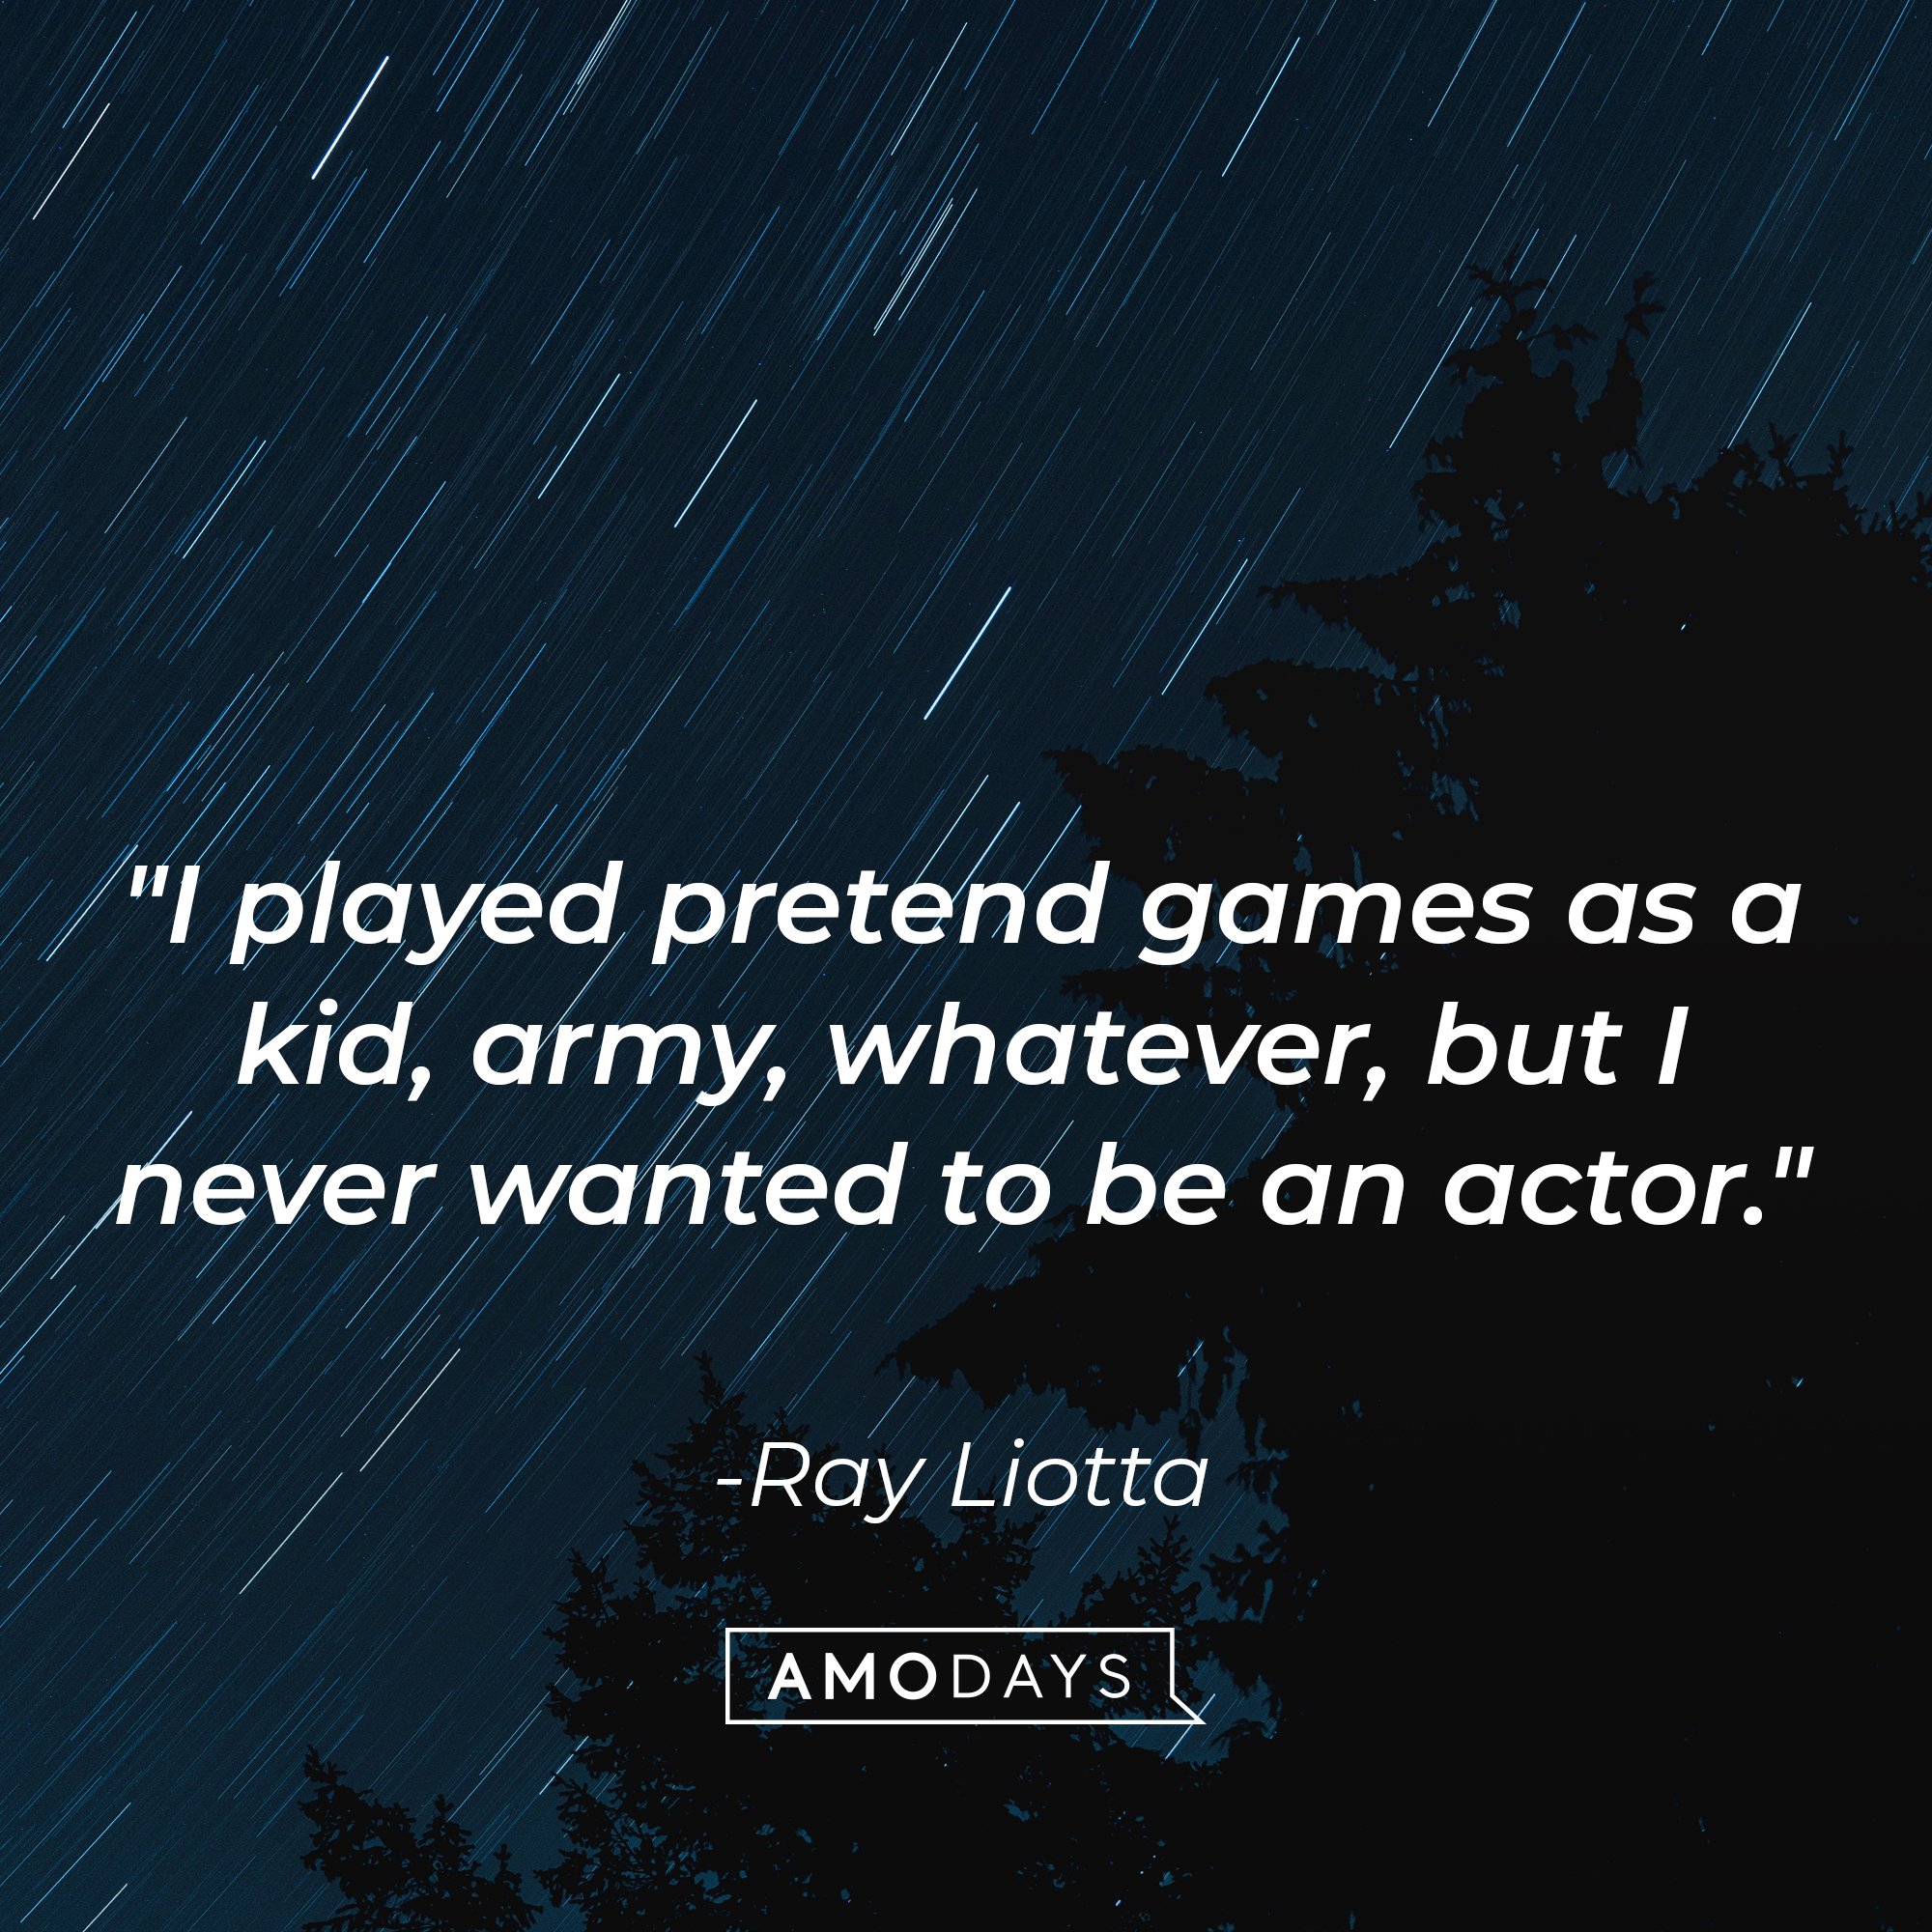 Ray Liotta’s quote: "I played pretend games as a kid, army, whatever, but I never wanted to be an actor." | Image: AmoDays